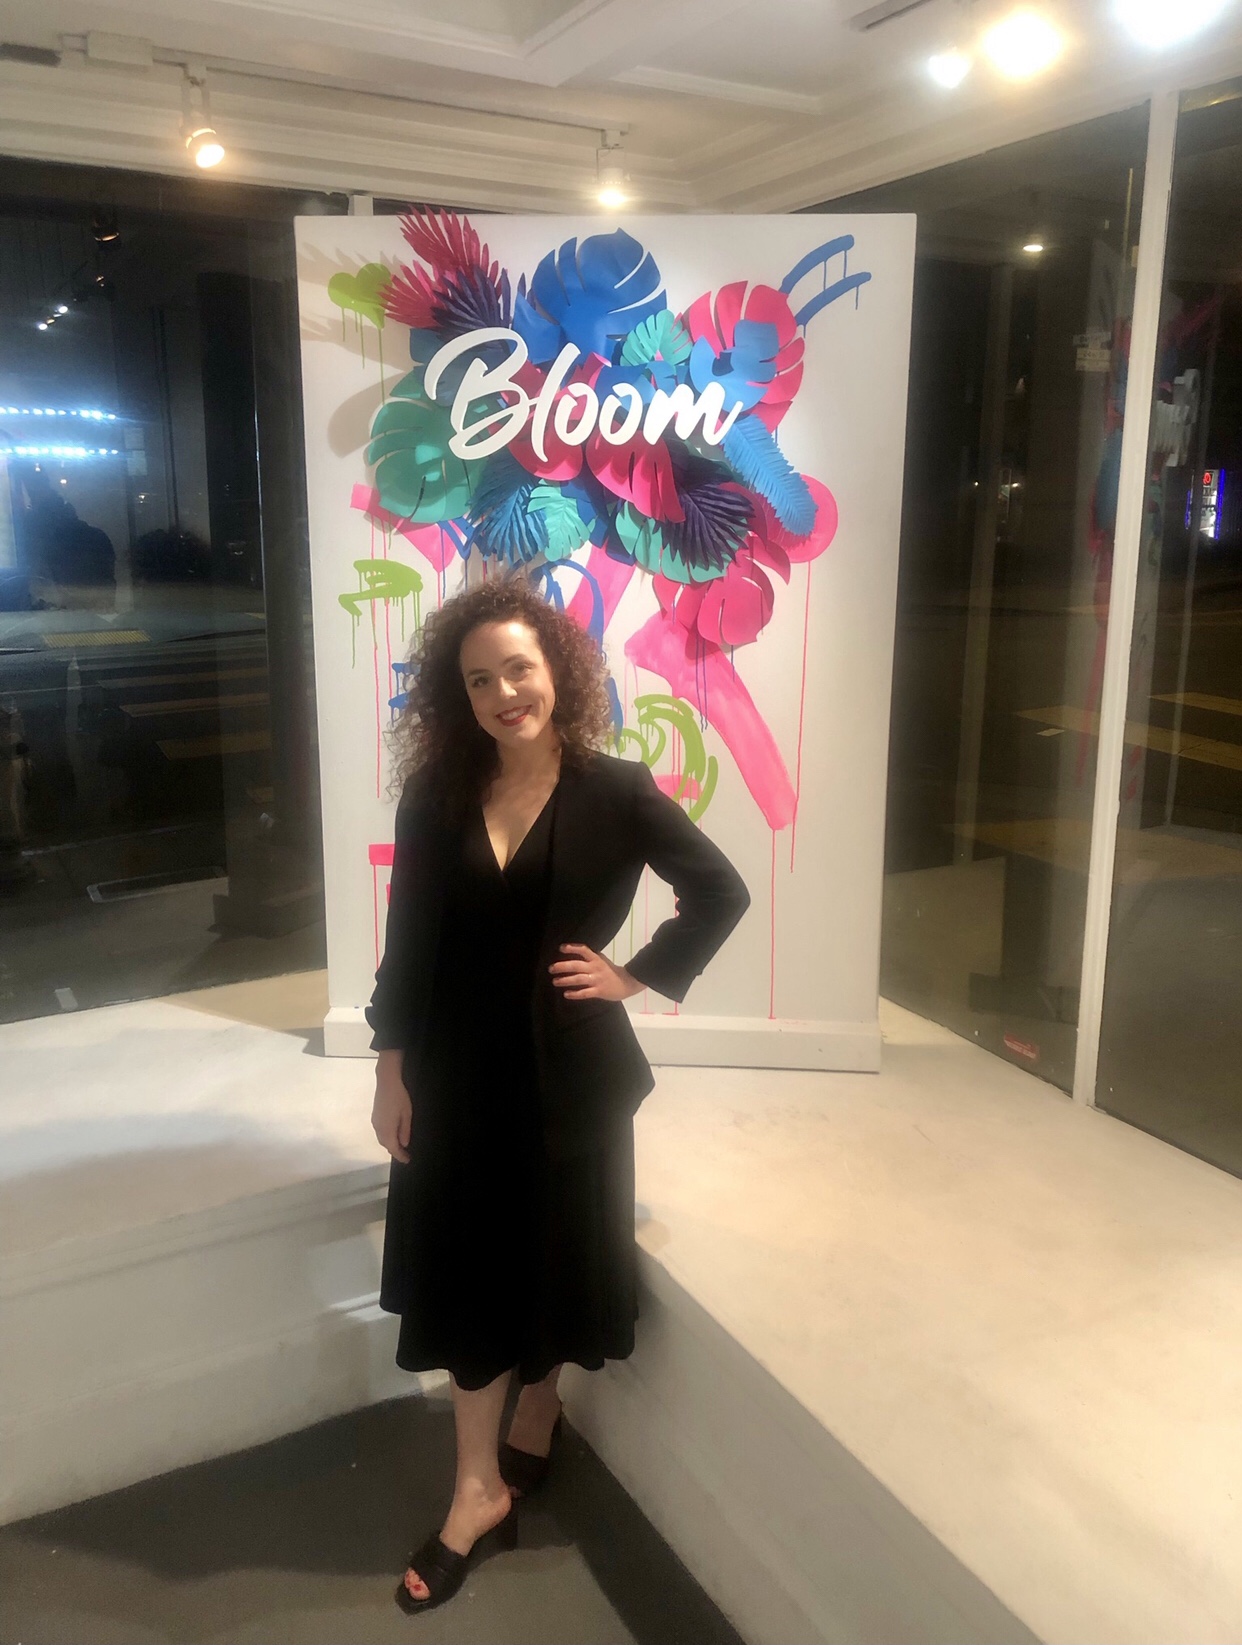 Owner and curator Ashley Voss beaming after yet another successful opening at Voss Gallery stands in front of sign that says Bloom